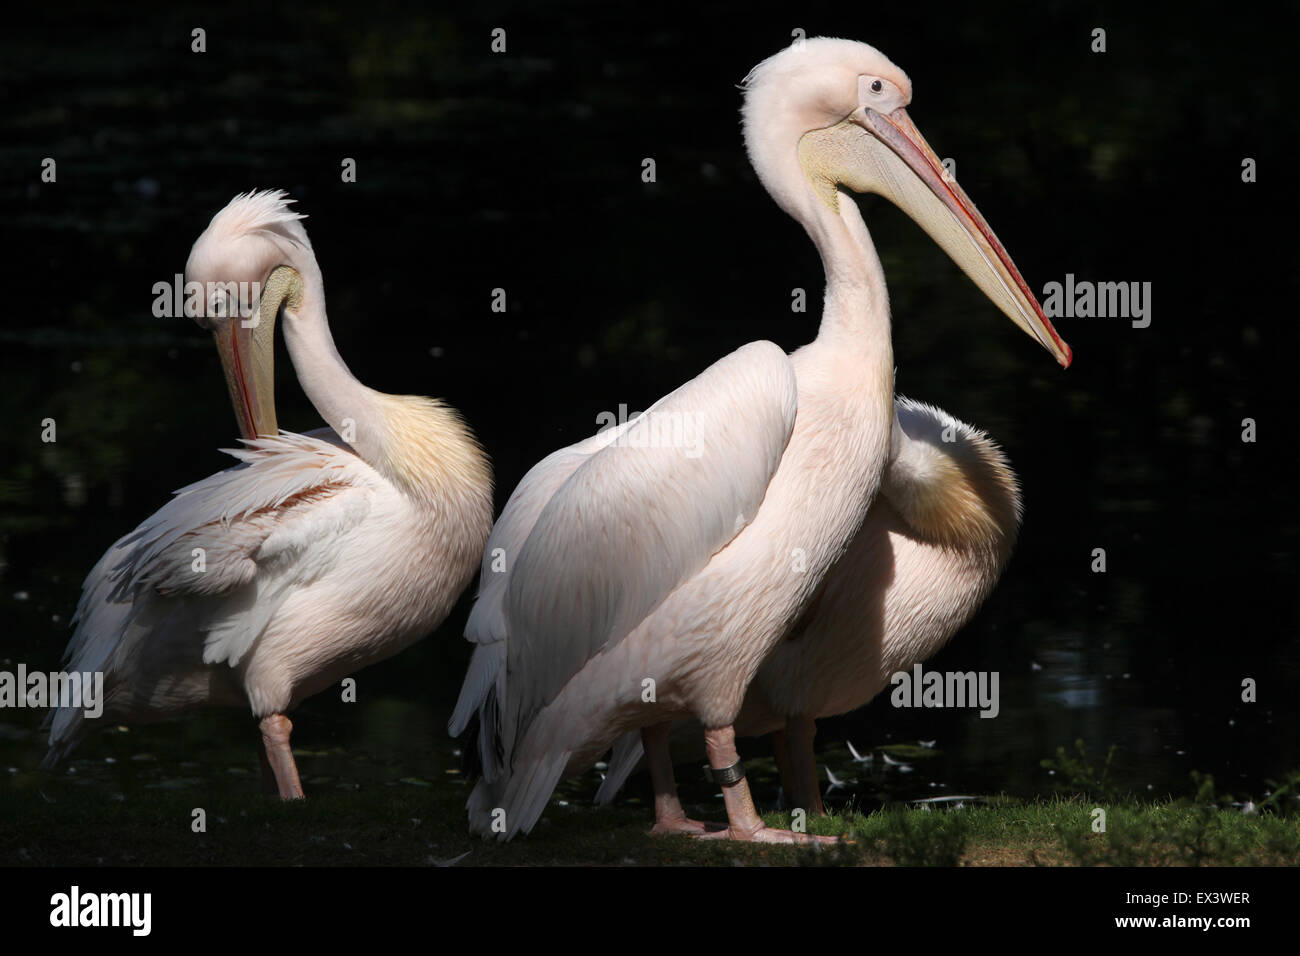 Great white pelican (Pelecanus onocrotalus), also known as the rosy pelican at Frankfurt Zoo in Frankfurt am Main, Germany. Stock Photo